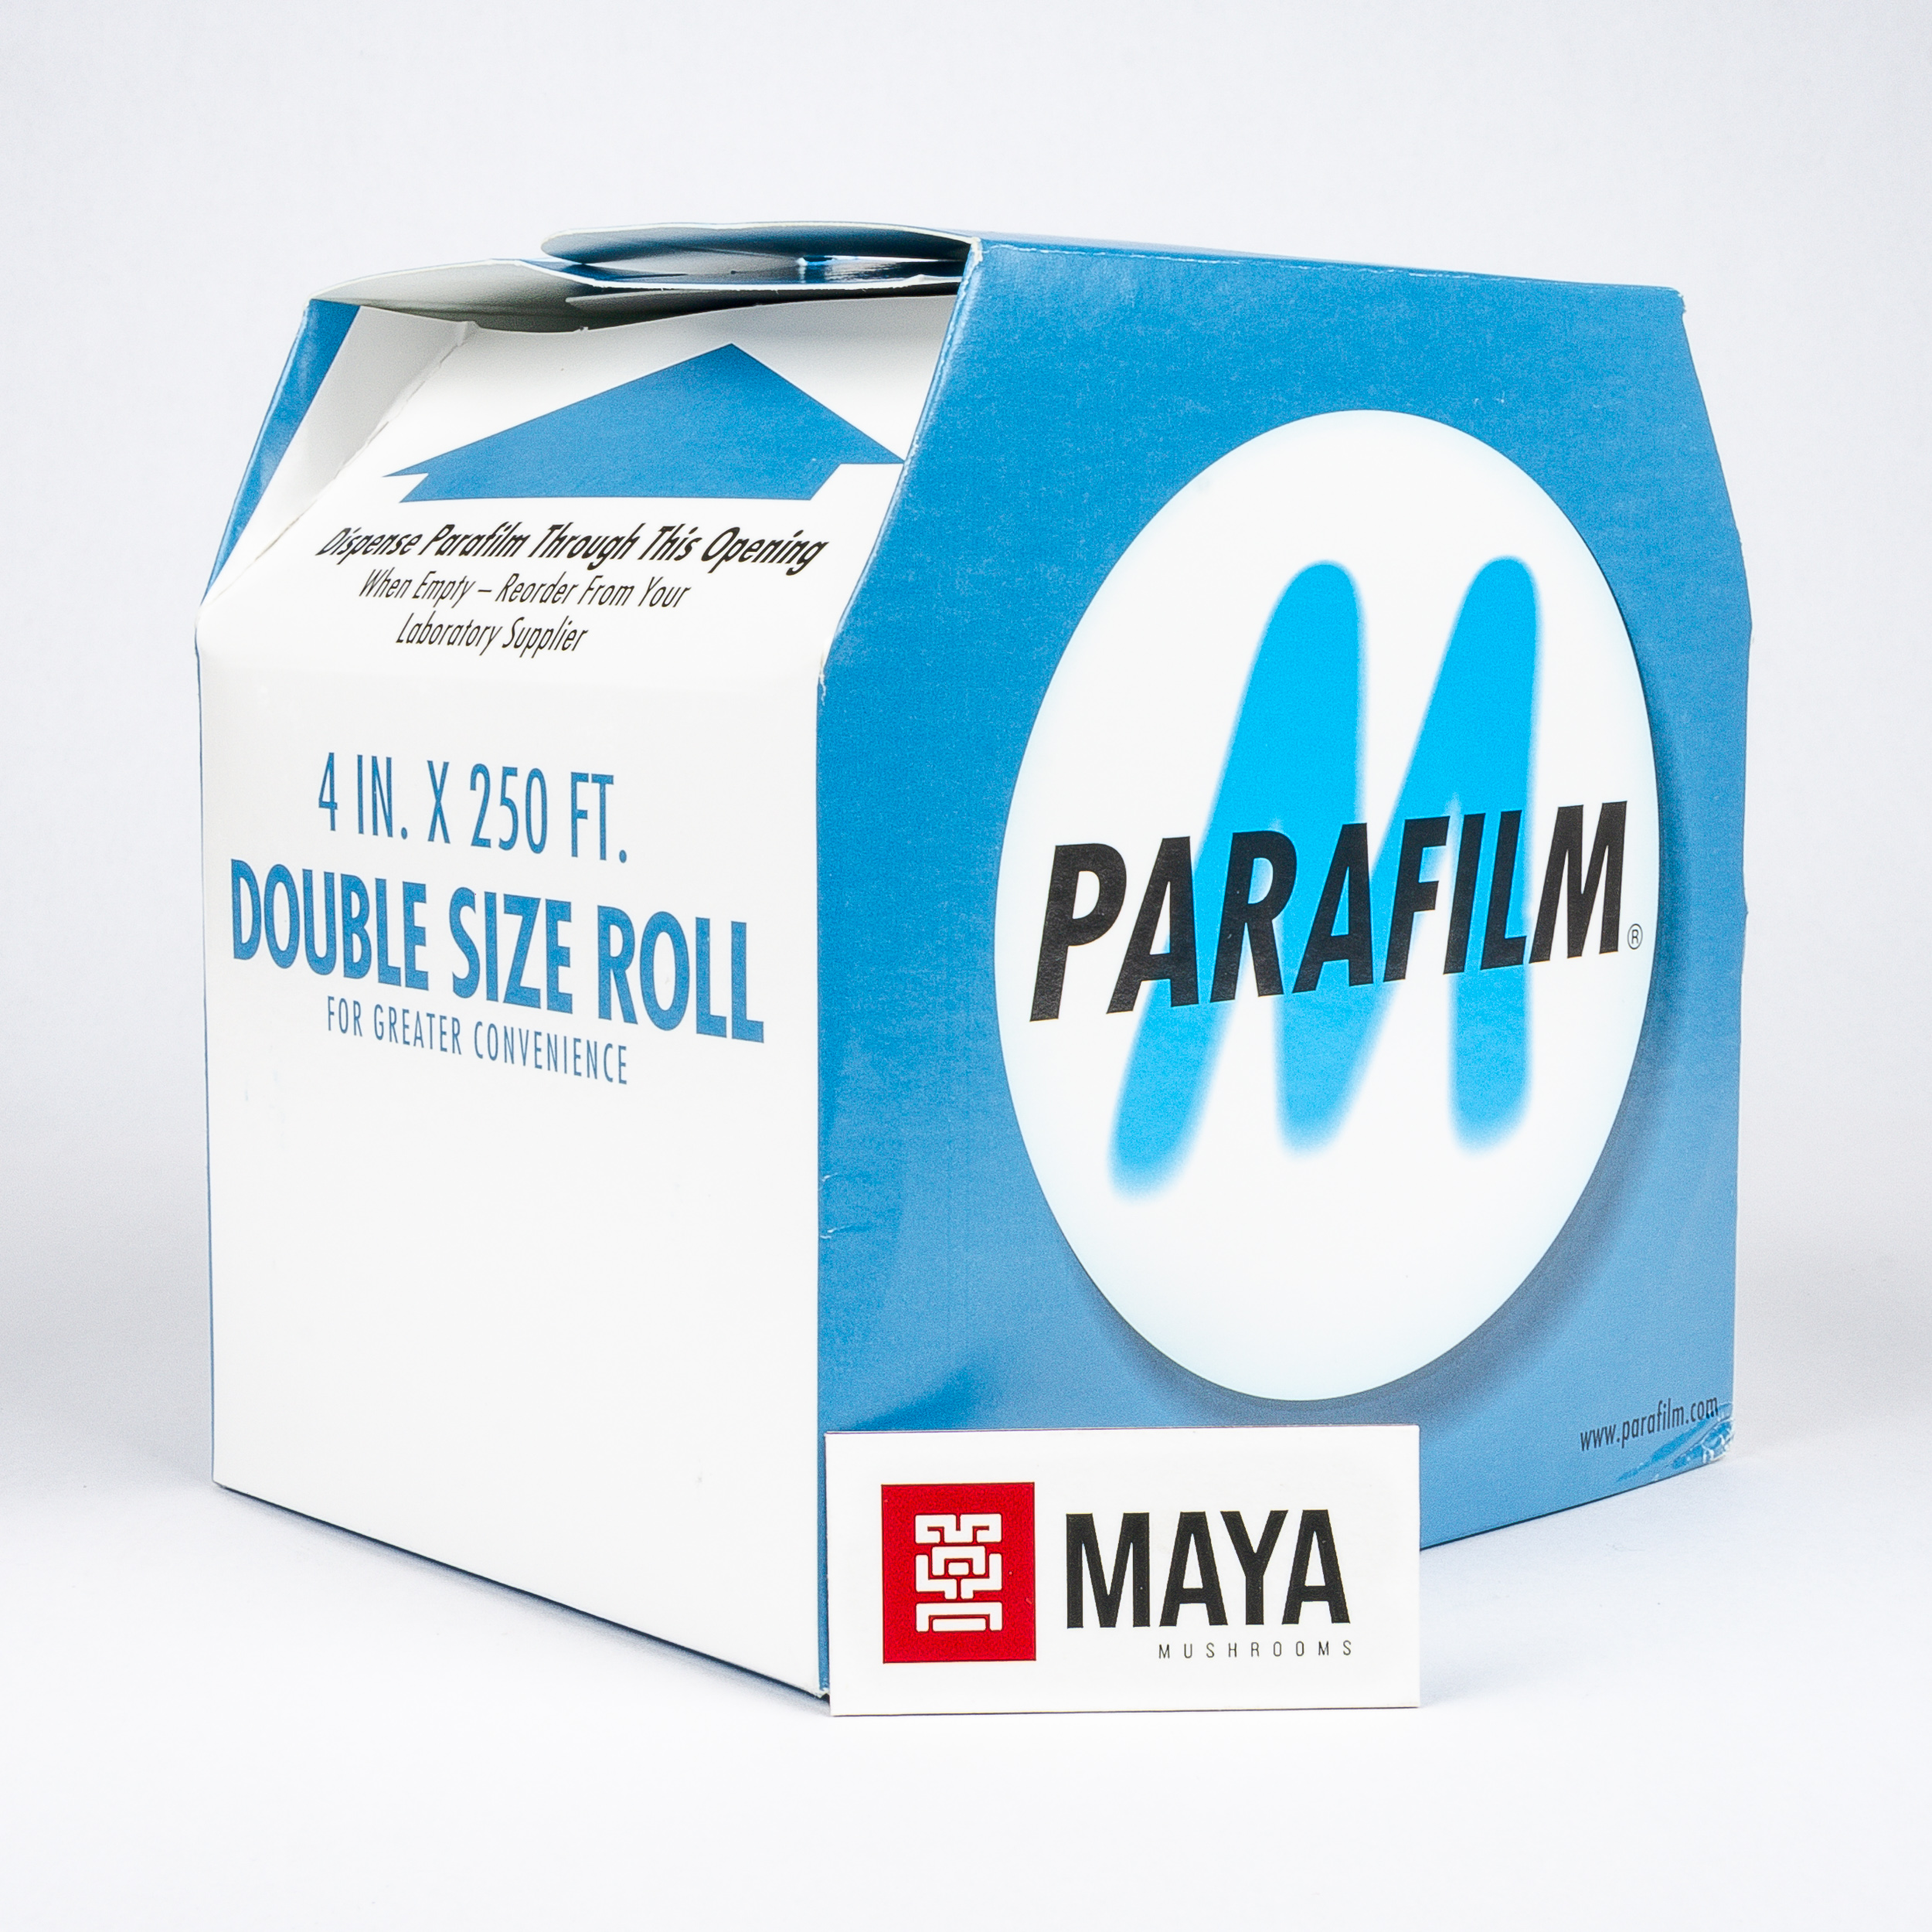 Parafilm 4-Inch Double Size Roll - angled side view